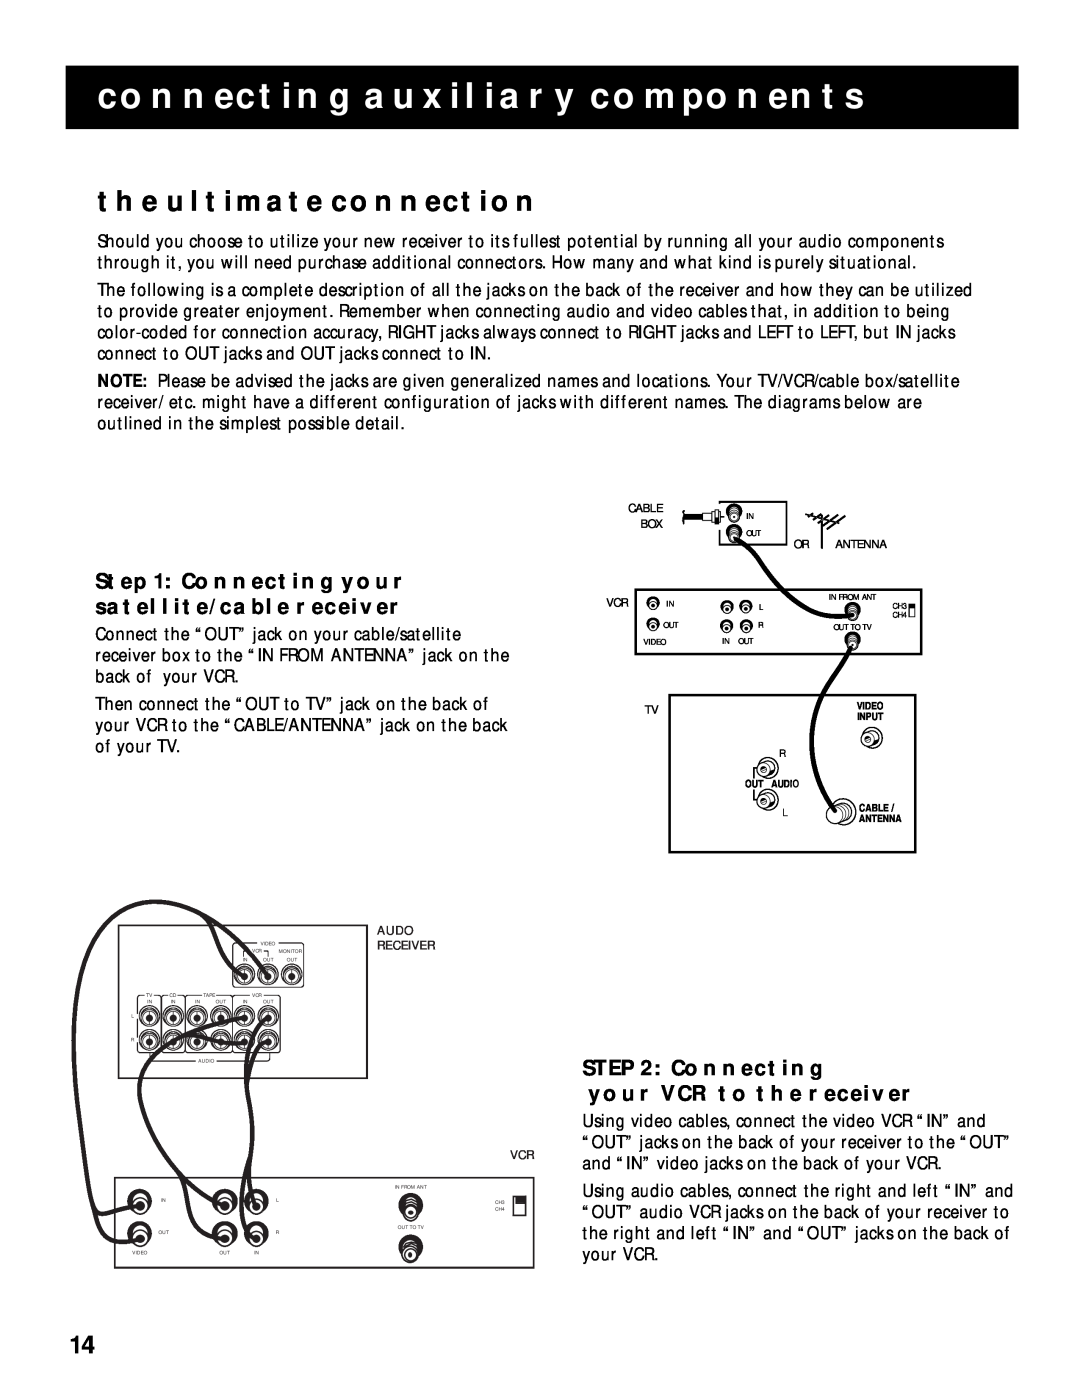 RCA RV-9968 manual The Ultimate Connection, Connecting Your Satellite/Cable Receiver, Connecting Your Vcr To The Receiver 